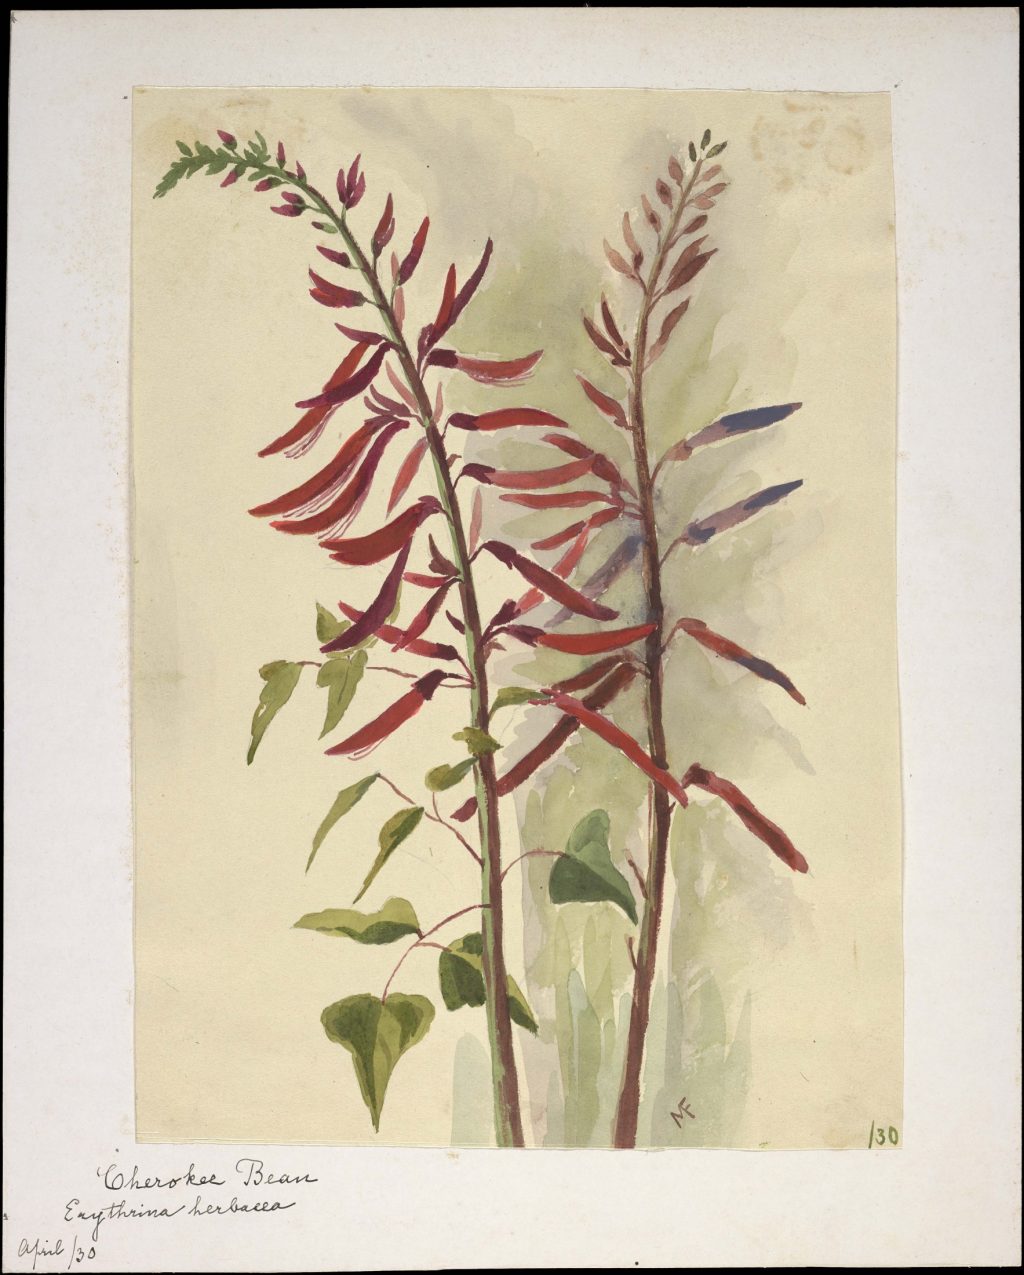 Watercolor illustration of Erythrina herbacea